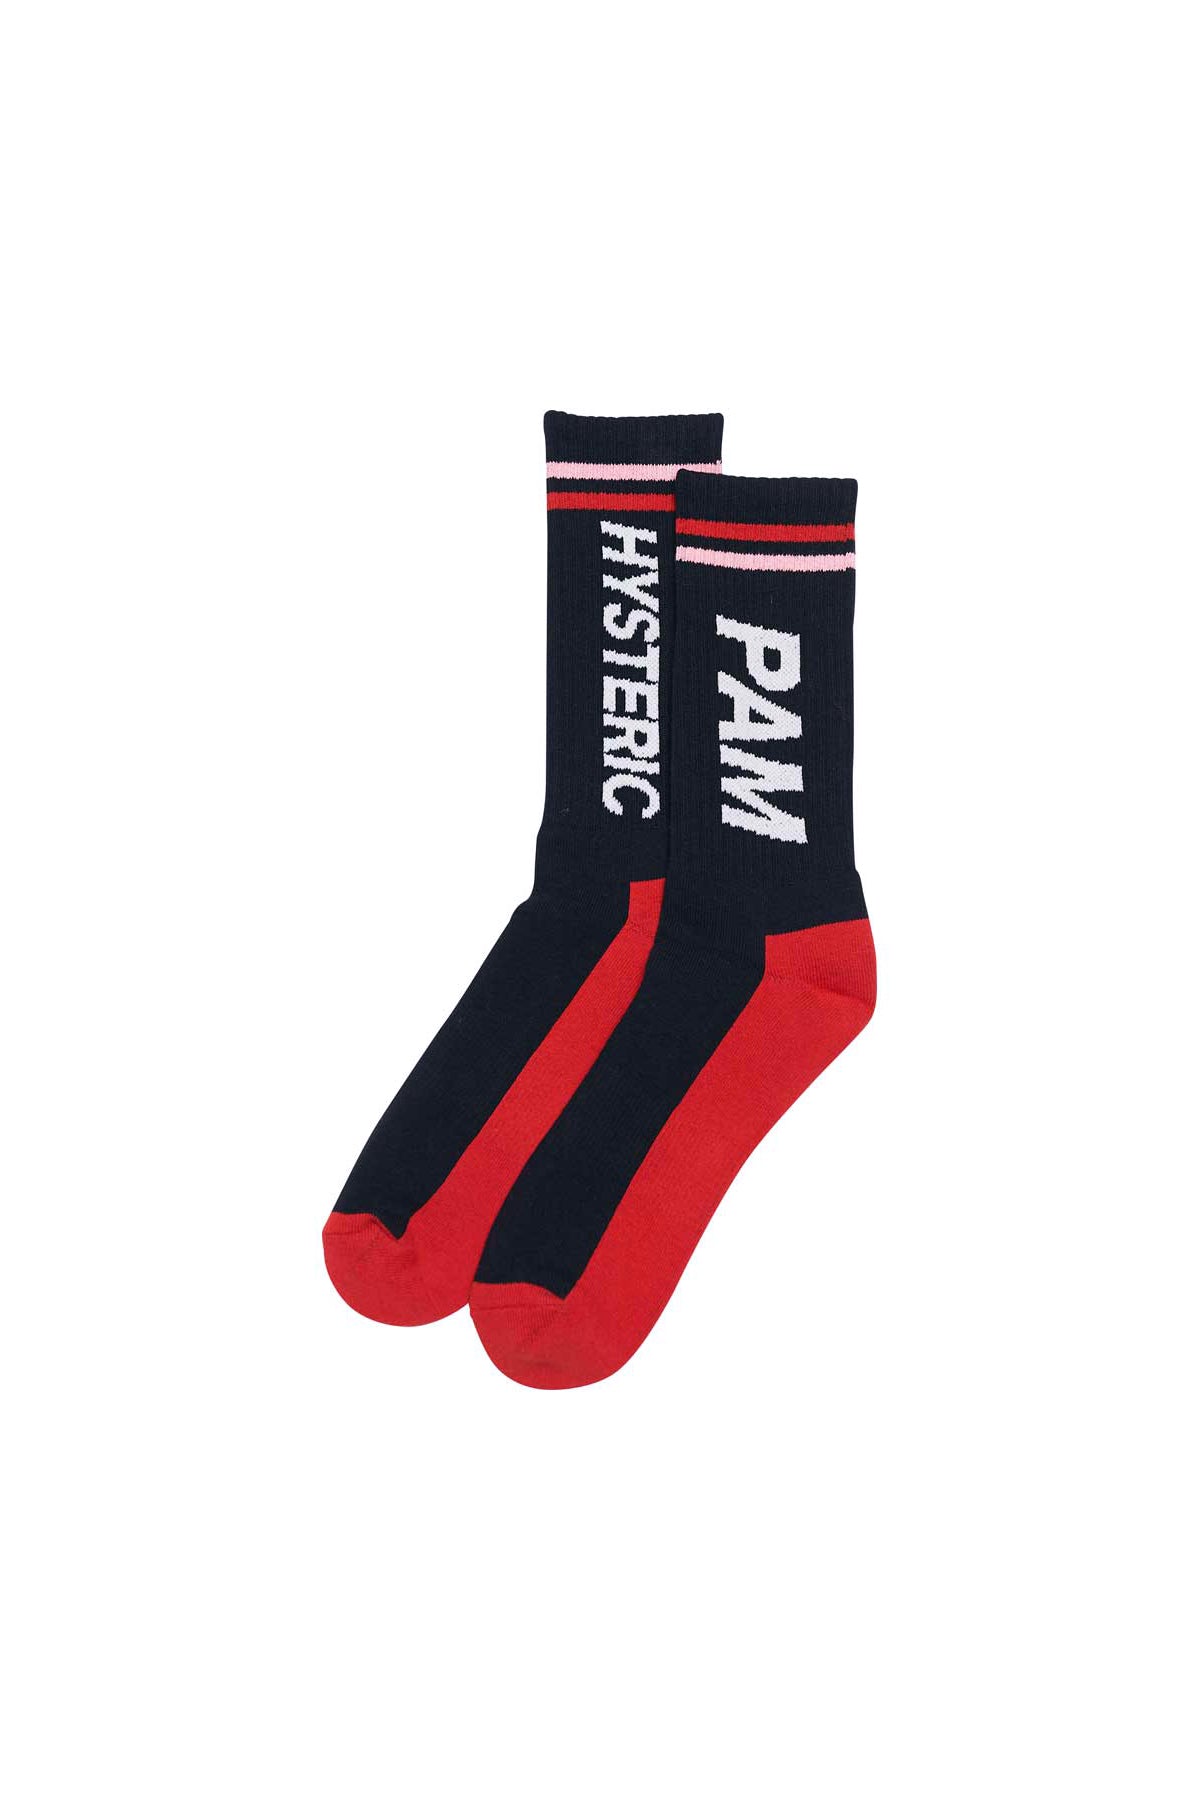 The PAM X HYSTERIC GLAMOUR - LOGO SPORT SOCKS BLACK available online with global shipping, and in PAM Stores Melbourne and Sydney.